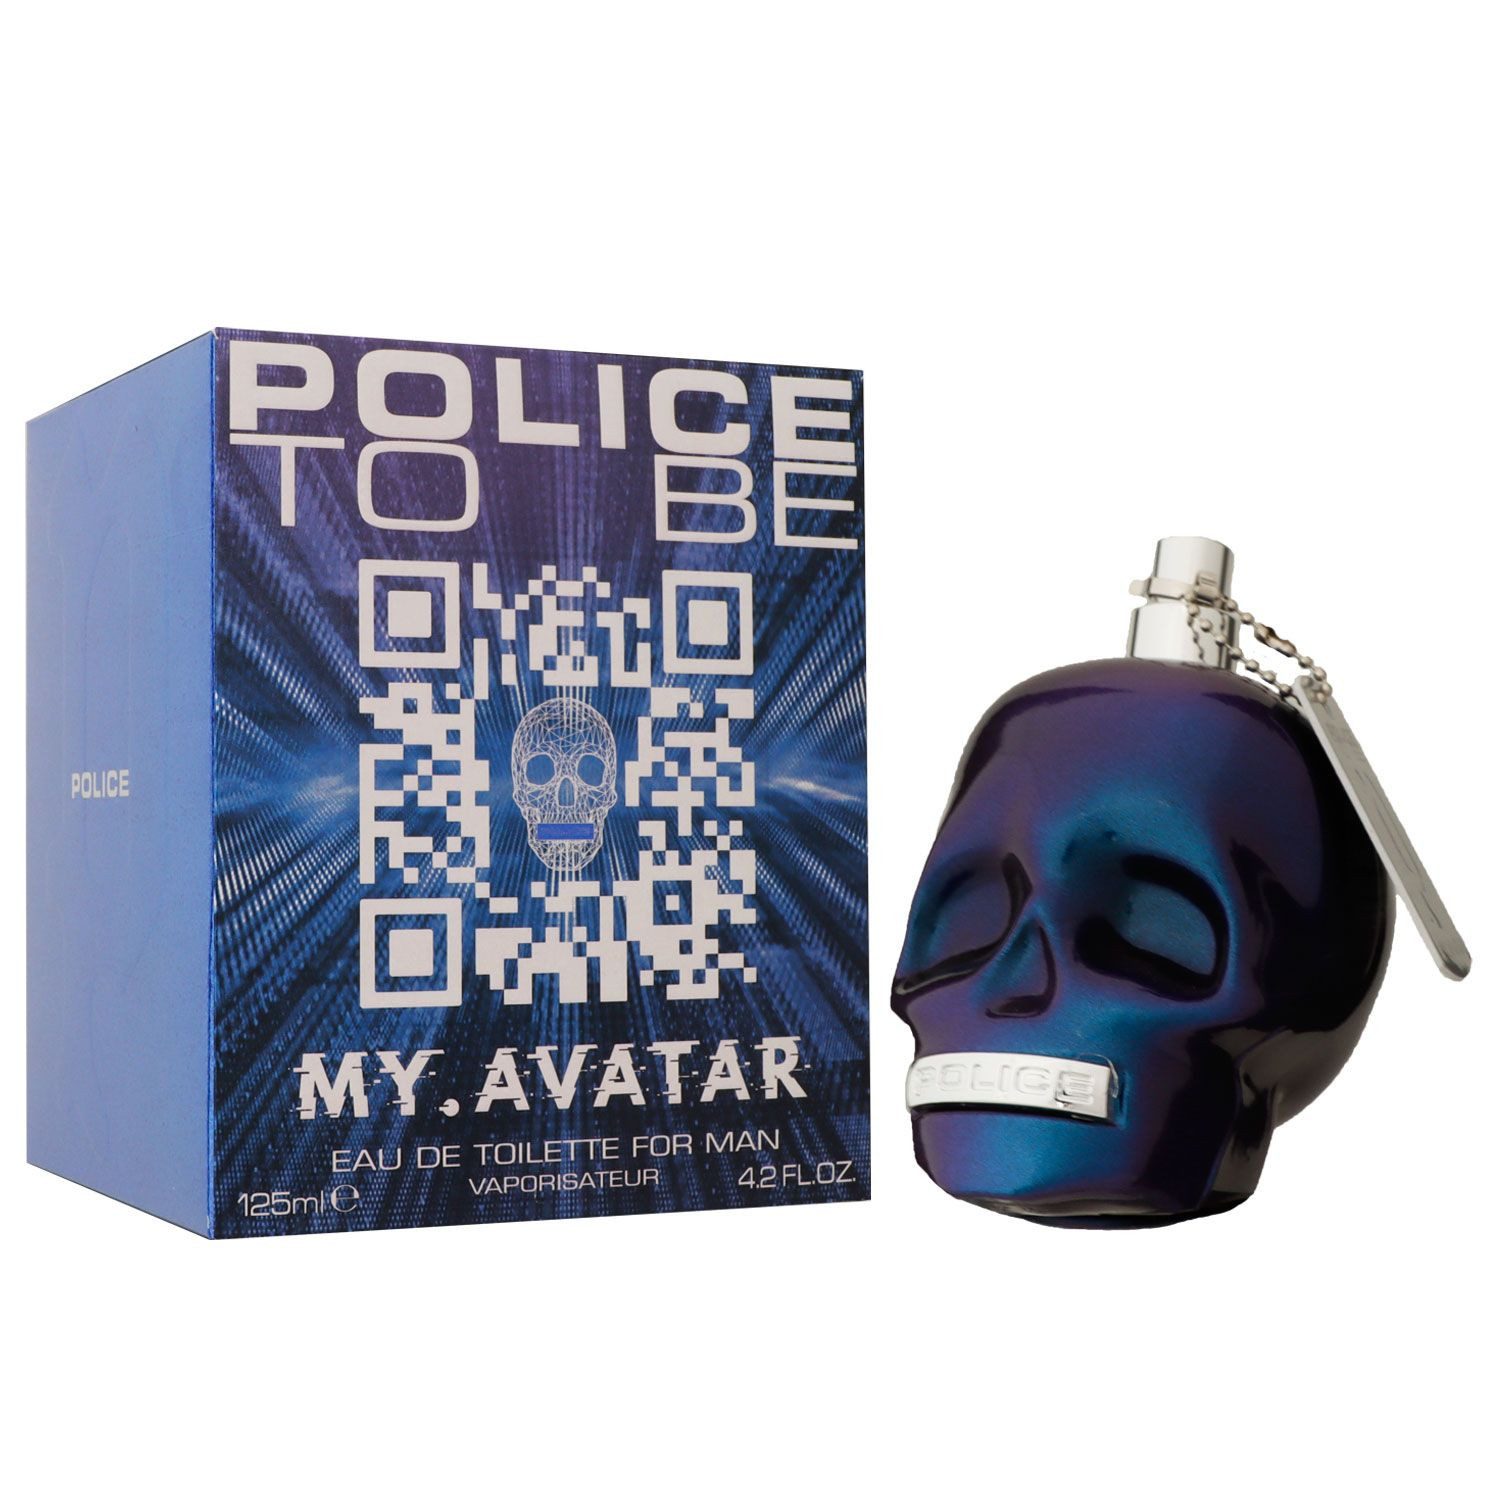 Police Eau de Toilette To Be My Avatar for Man 125 ml